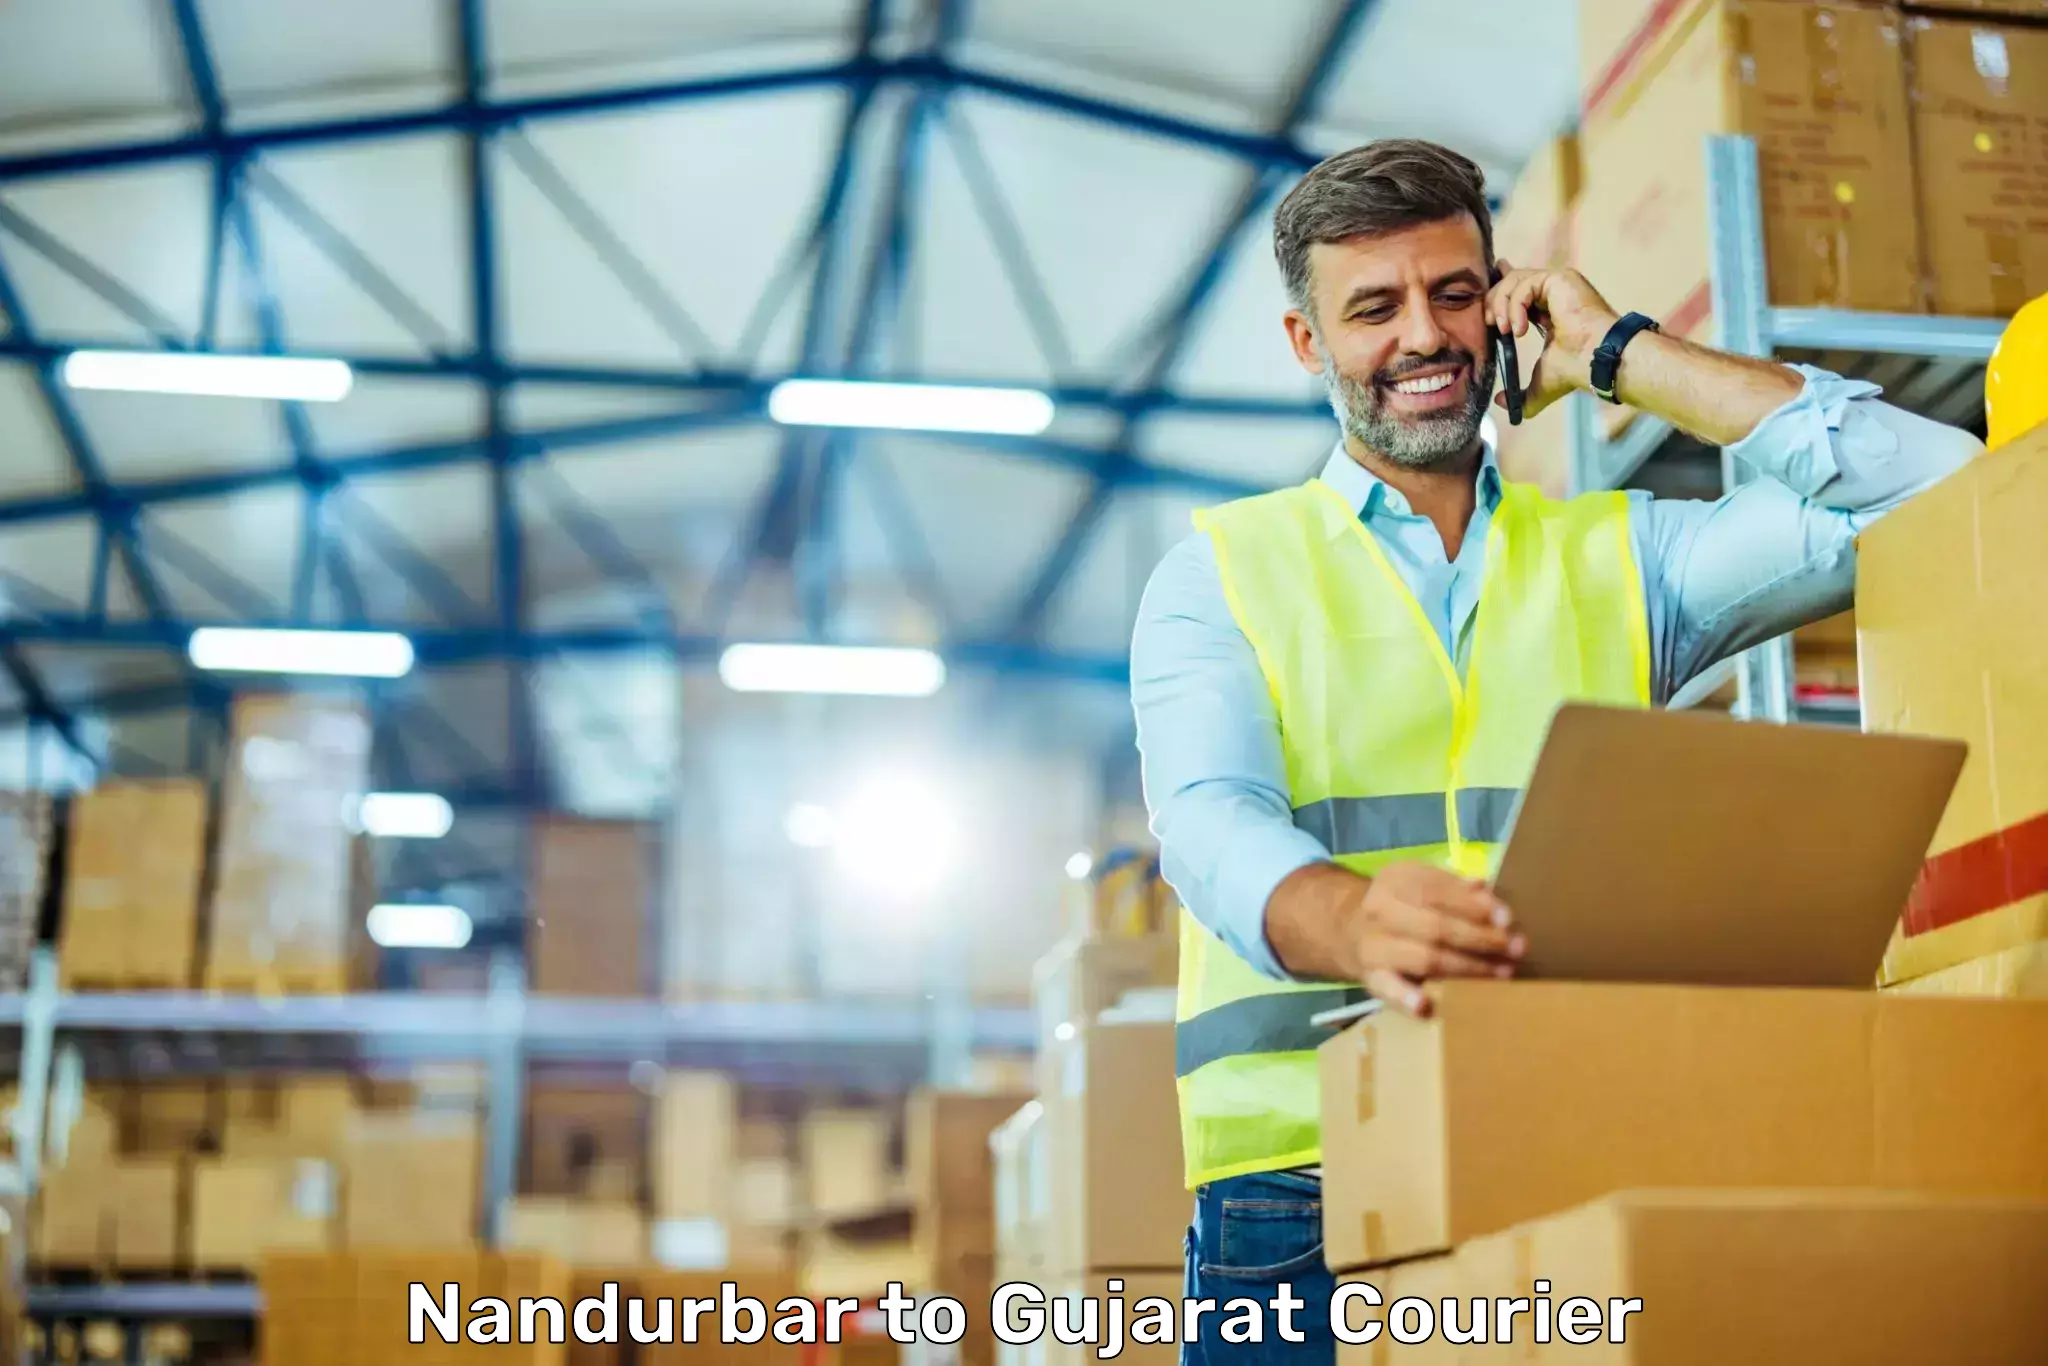 Global courier networks Nandurbar to Dahod